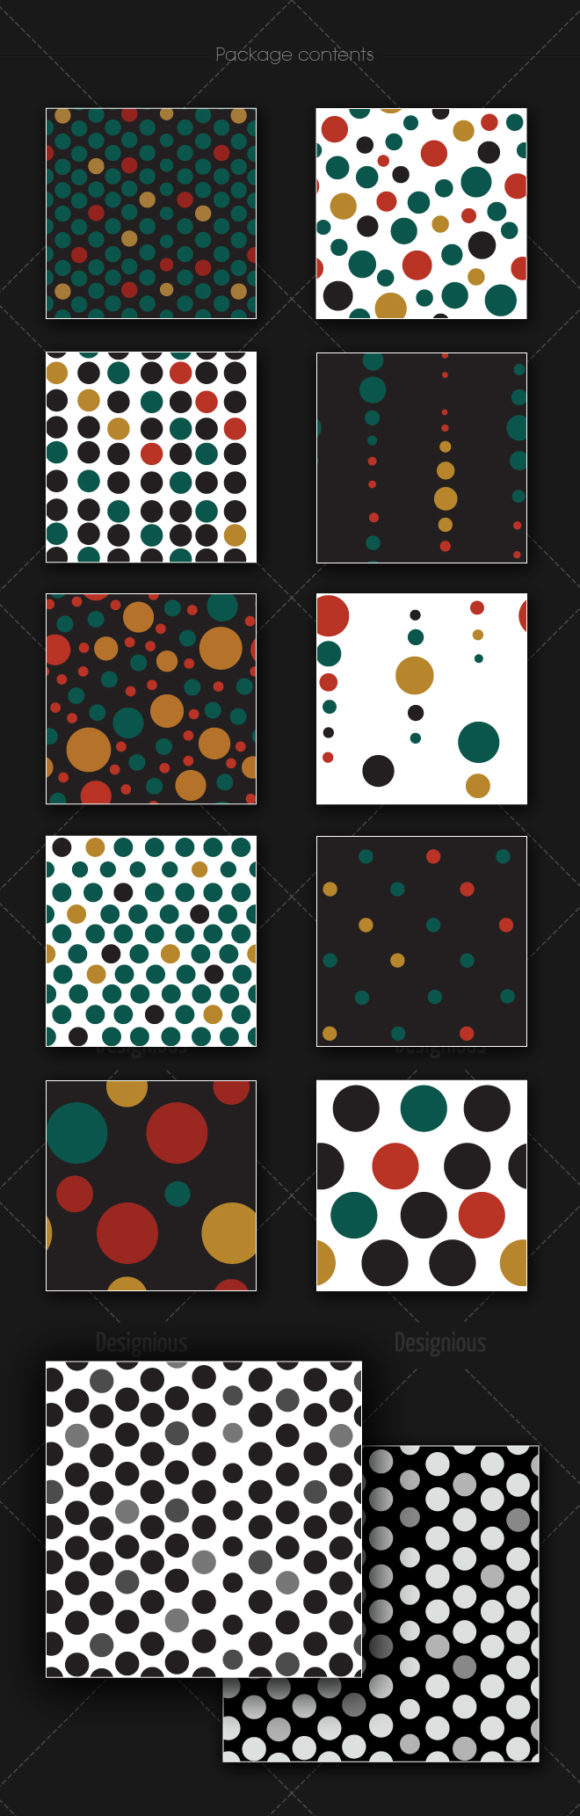 Seamless Patterns Vector Pack 156 2